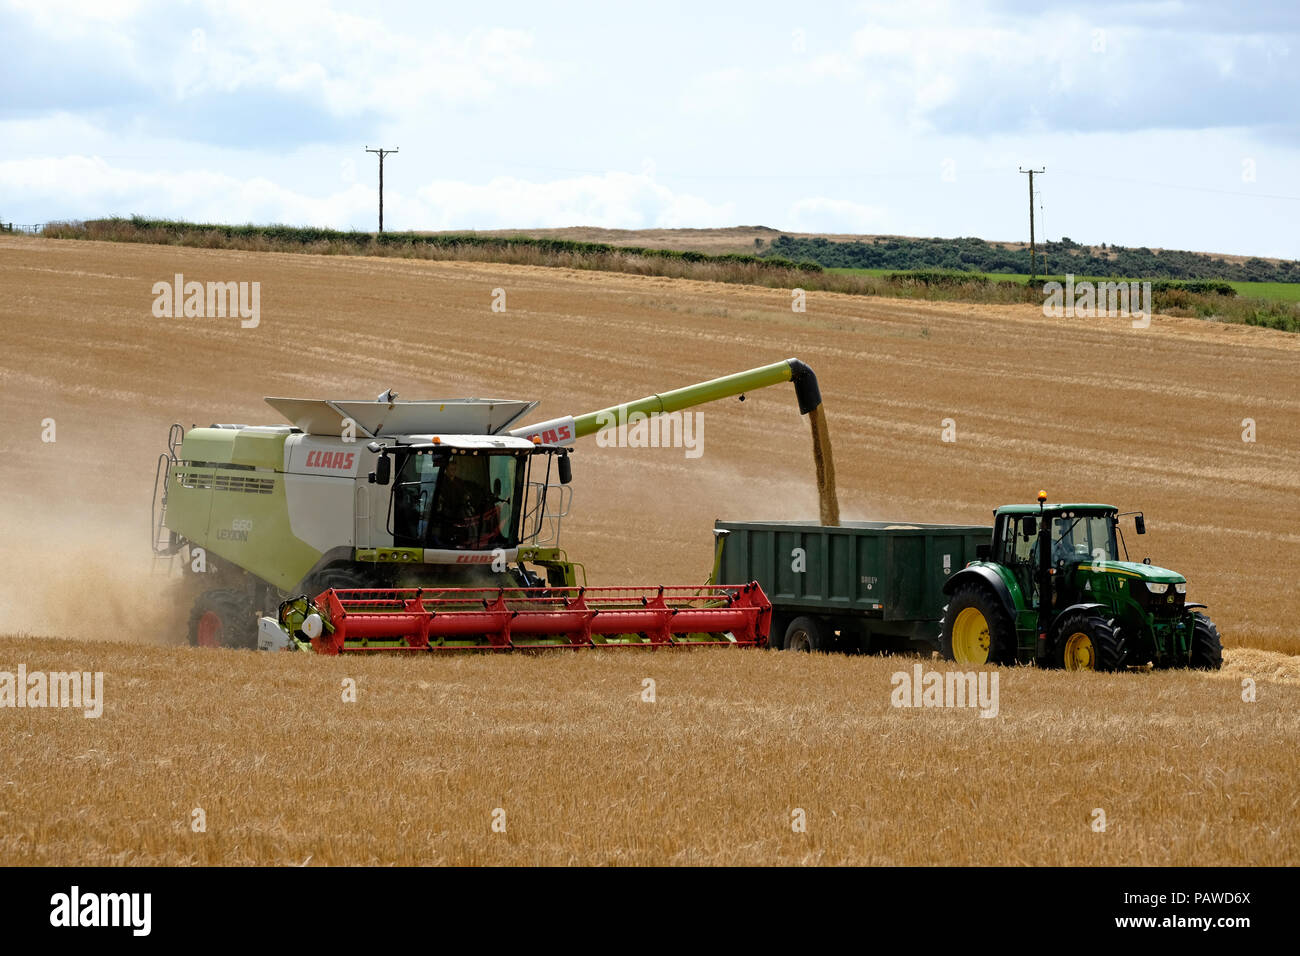 Kelso, Scotland, 25 July 2018.   Combine Harvester in Scottish Borders Tom Stewart from Sandyknowe Farm, near Kelso in the Scottish Borders, in a Claas Lexion 660 with Vario 770 cutterbar combine harvester, working in fields near his farm on Wednesday 25 July 2018. transferring crop to a waiting tractor to move to the farm a few miles away.   (Photo by Rob Gray / Freelance) Credit: Rob Gray/Alamy Live News Stock Photo